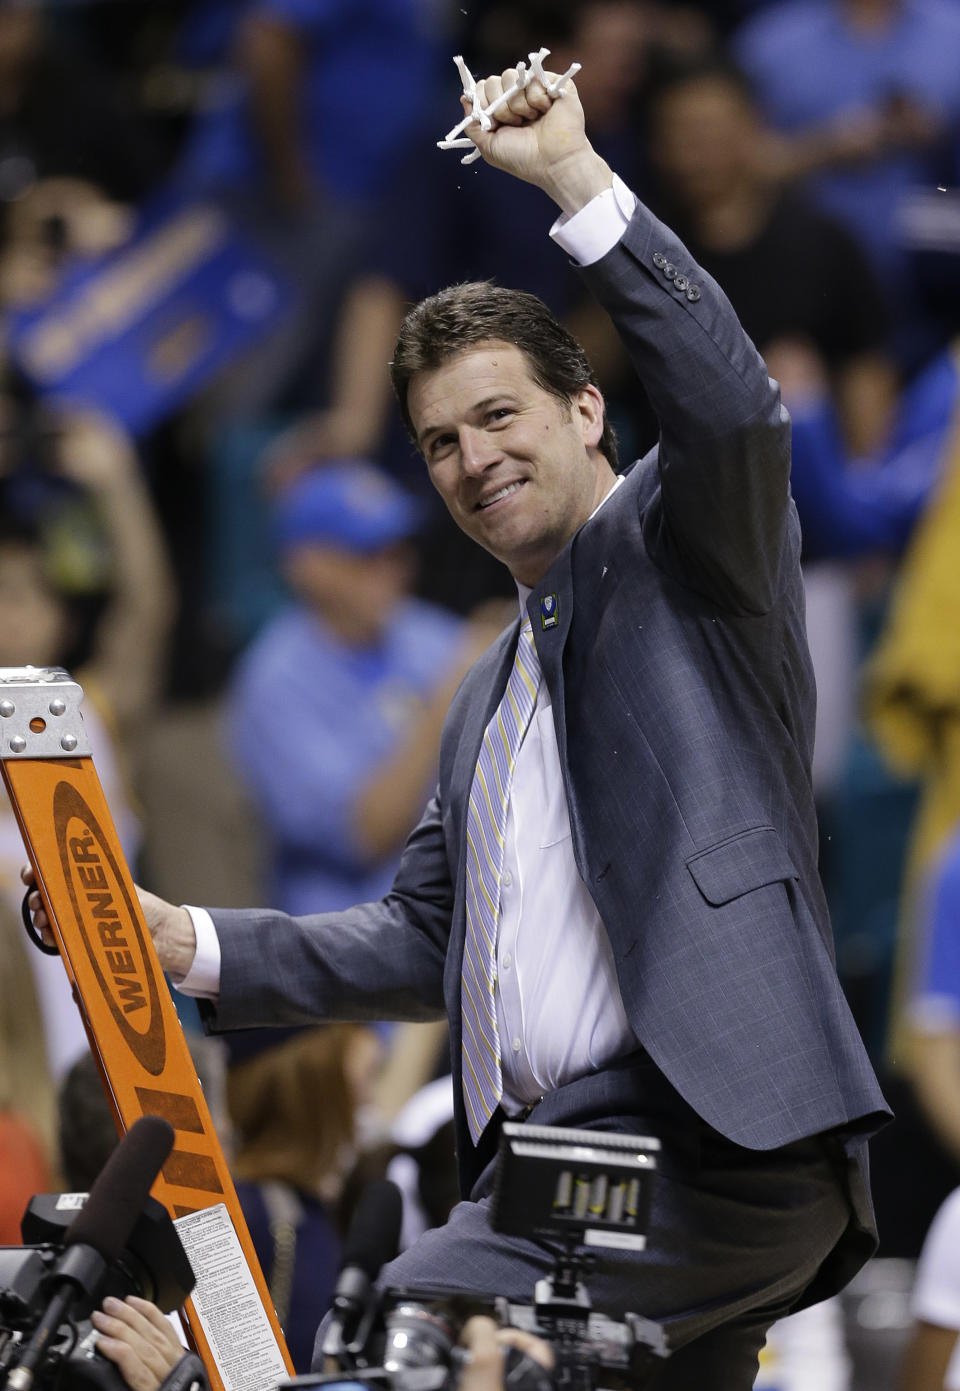 UCLA coach Steve Alford holds up a piece of the net after his team defeated Arizona, 75-71, in the championship game of the NCAA Pac-12 conference college basketball tournament, Saturday, March 15, 2014, in Las Vegas. (AP Photo/Julie Jacobson)